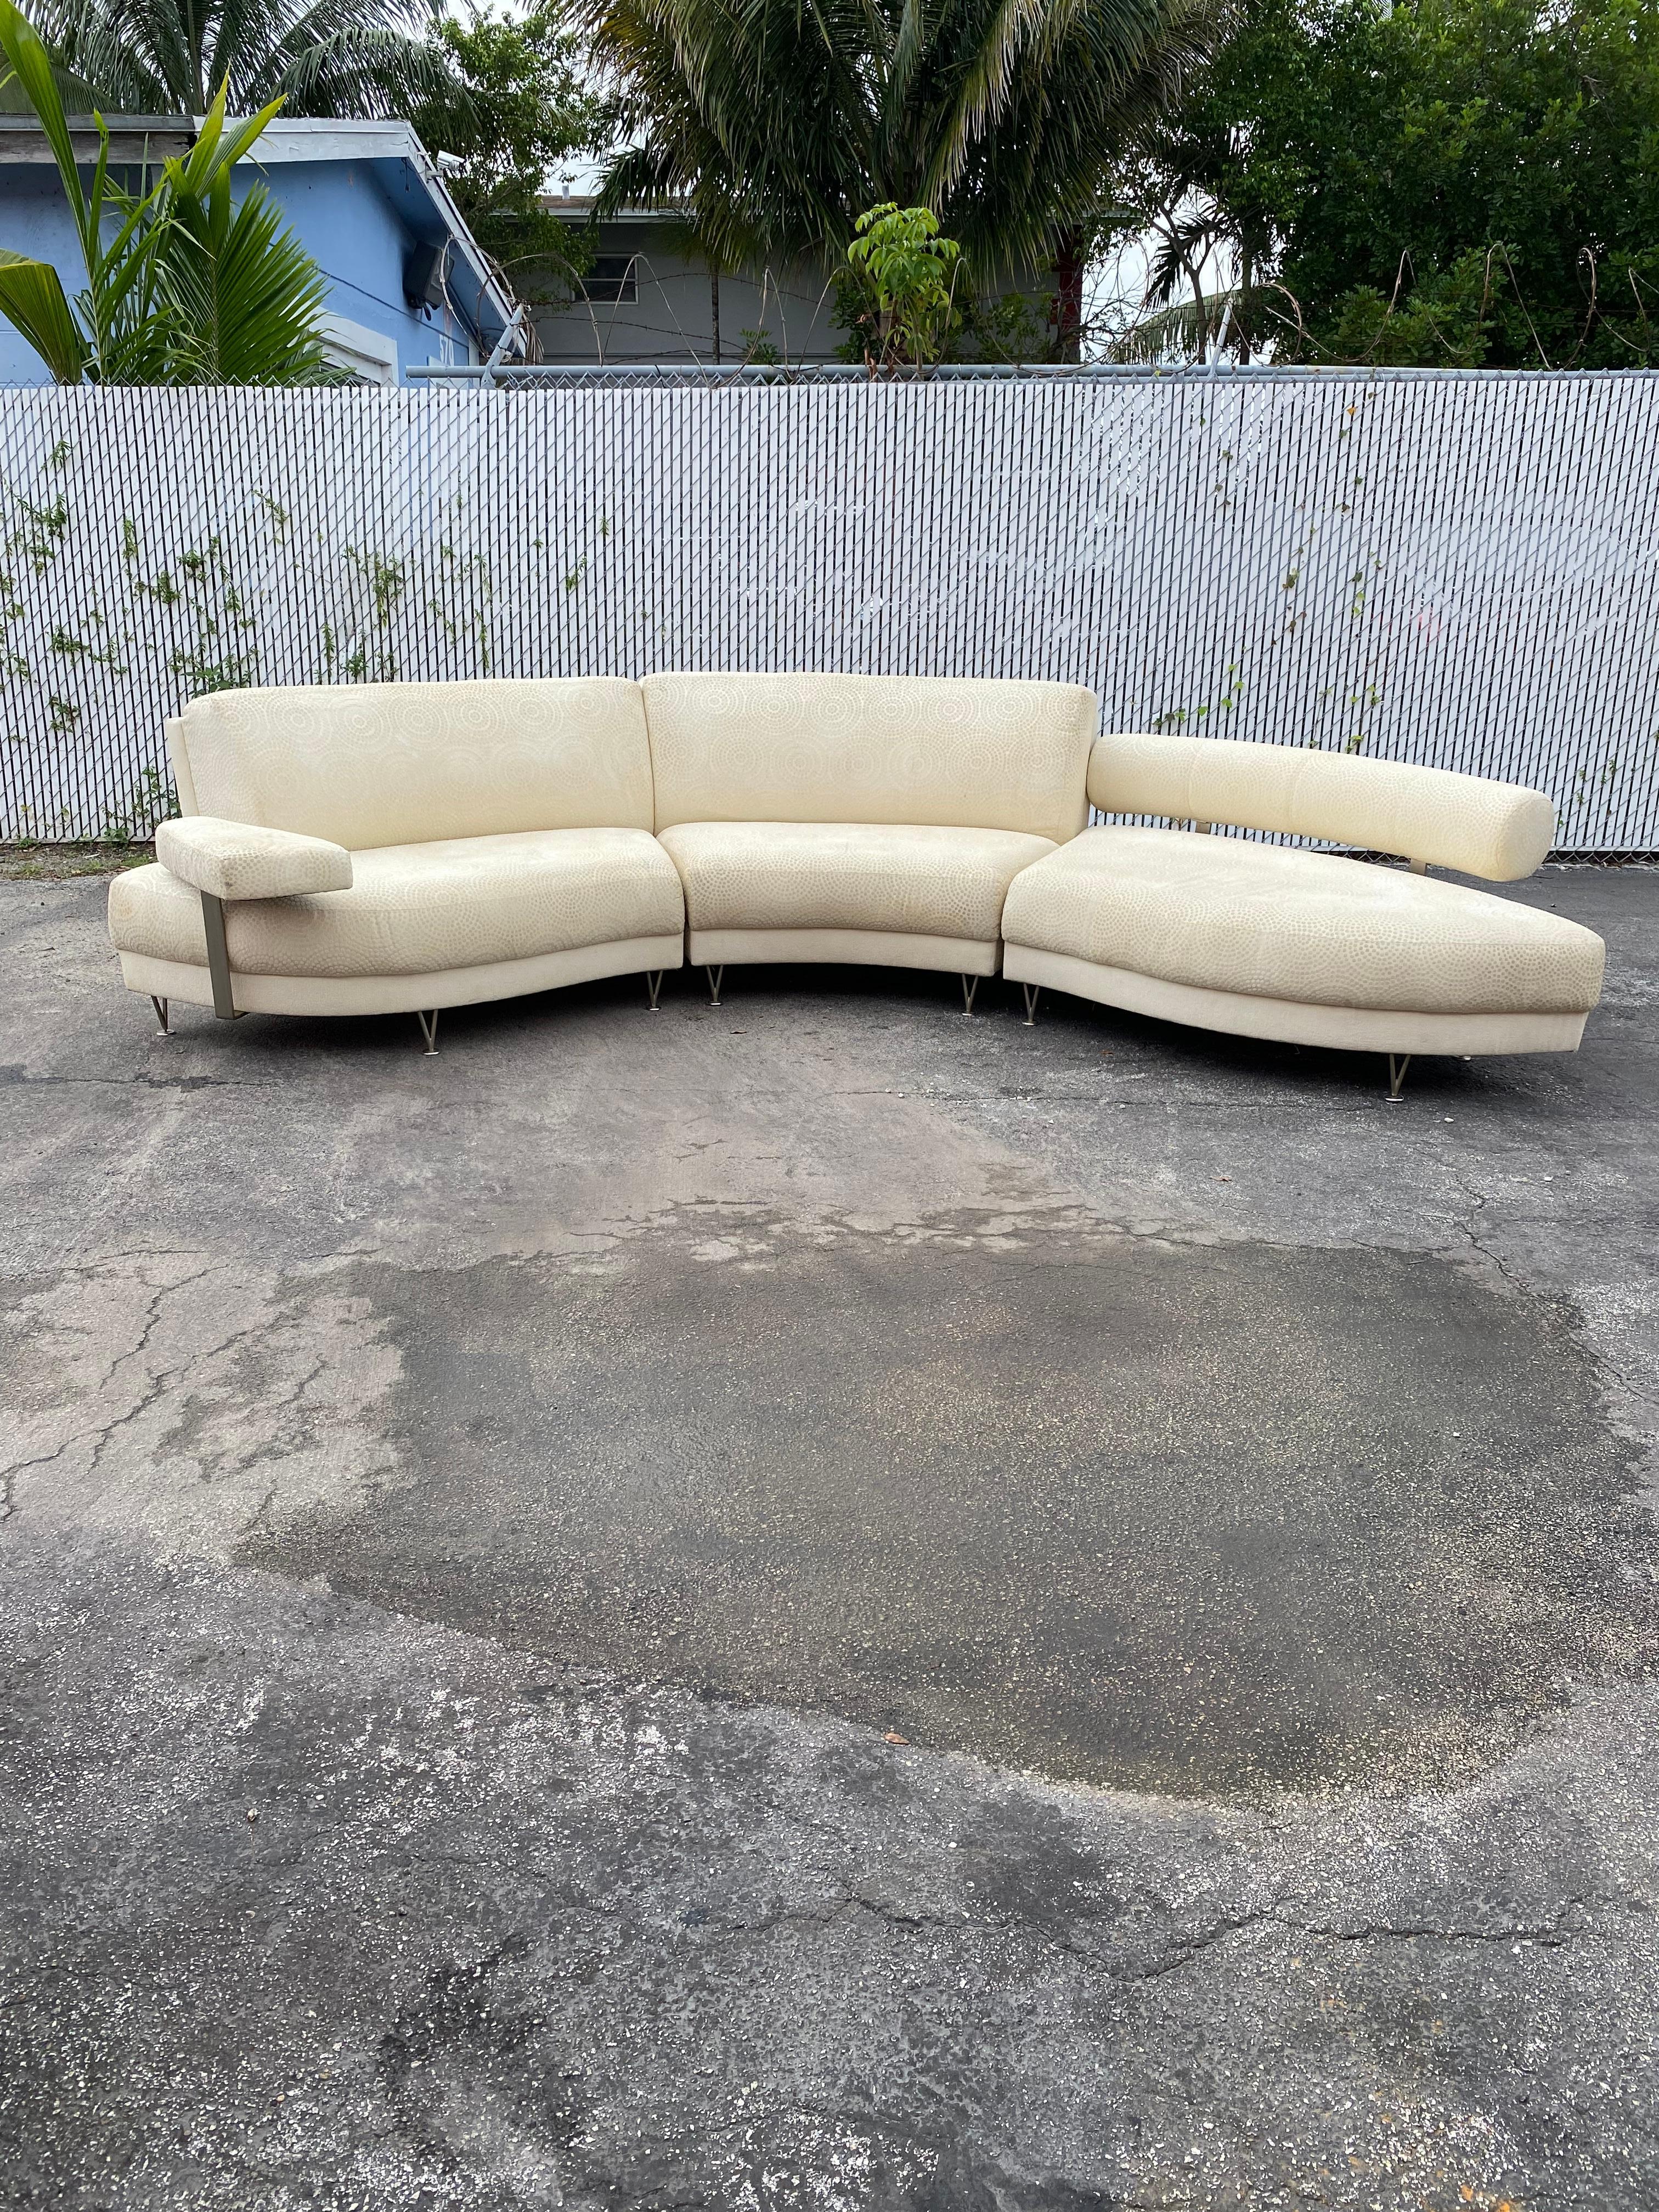 On offer on this occasion is one of the most stunning three pieces sectional you could hope to find. This is an ultra-rare opportunity to acquire what is, unequivocally, the best of the best, it being a most spectacular and beautifully-presented